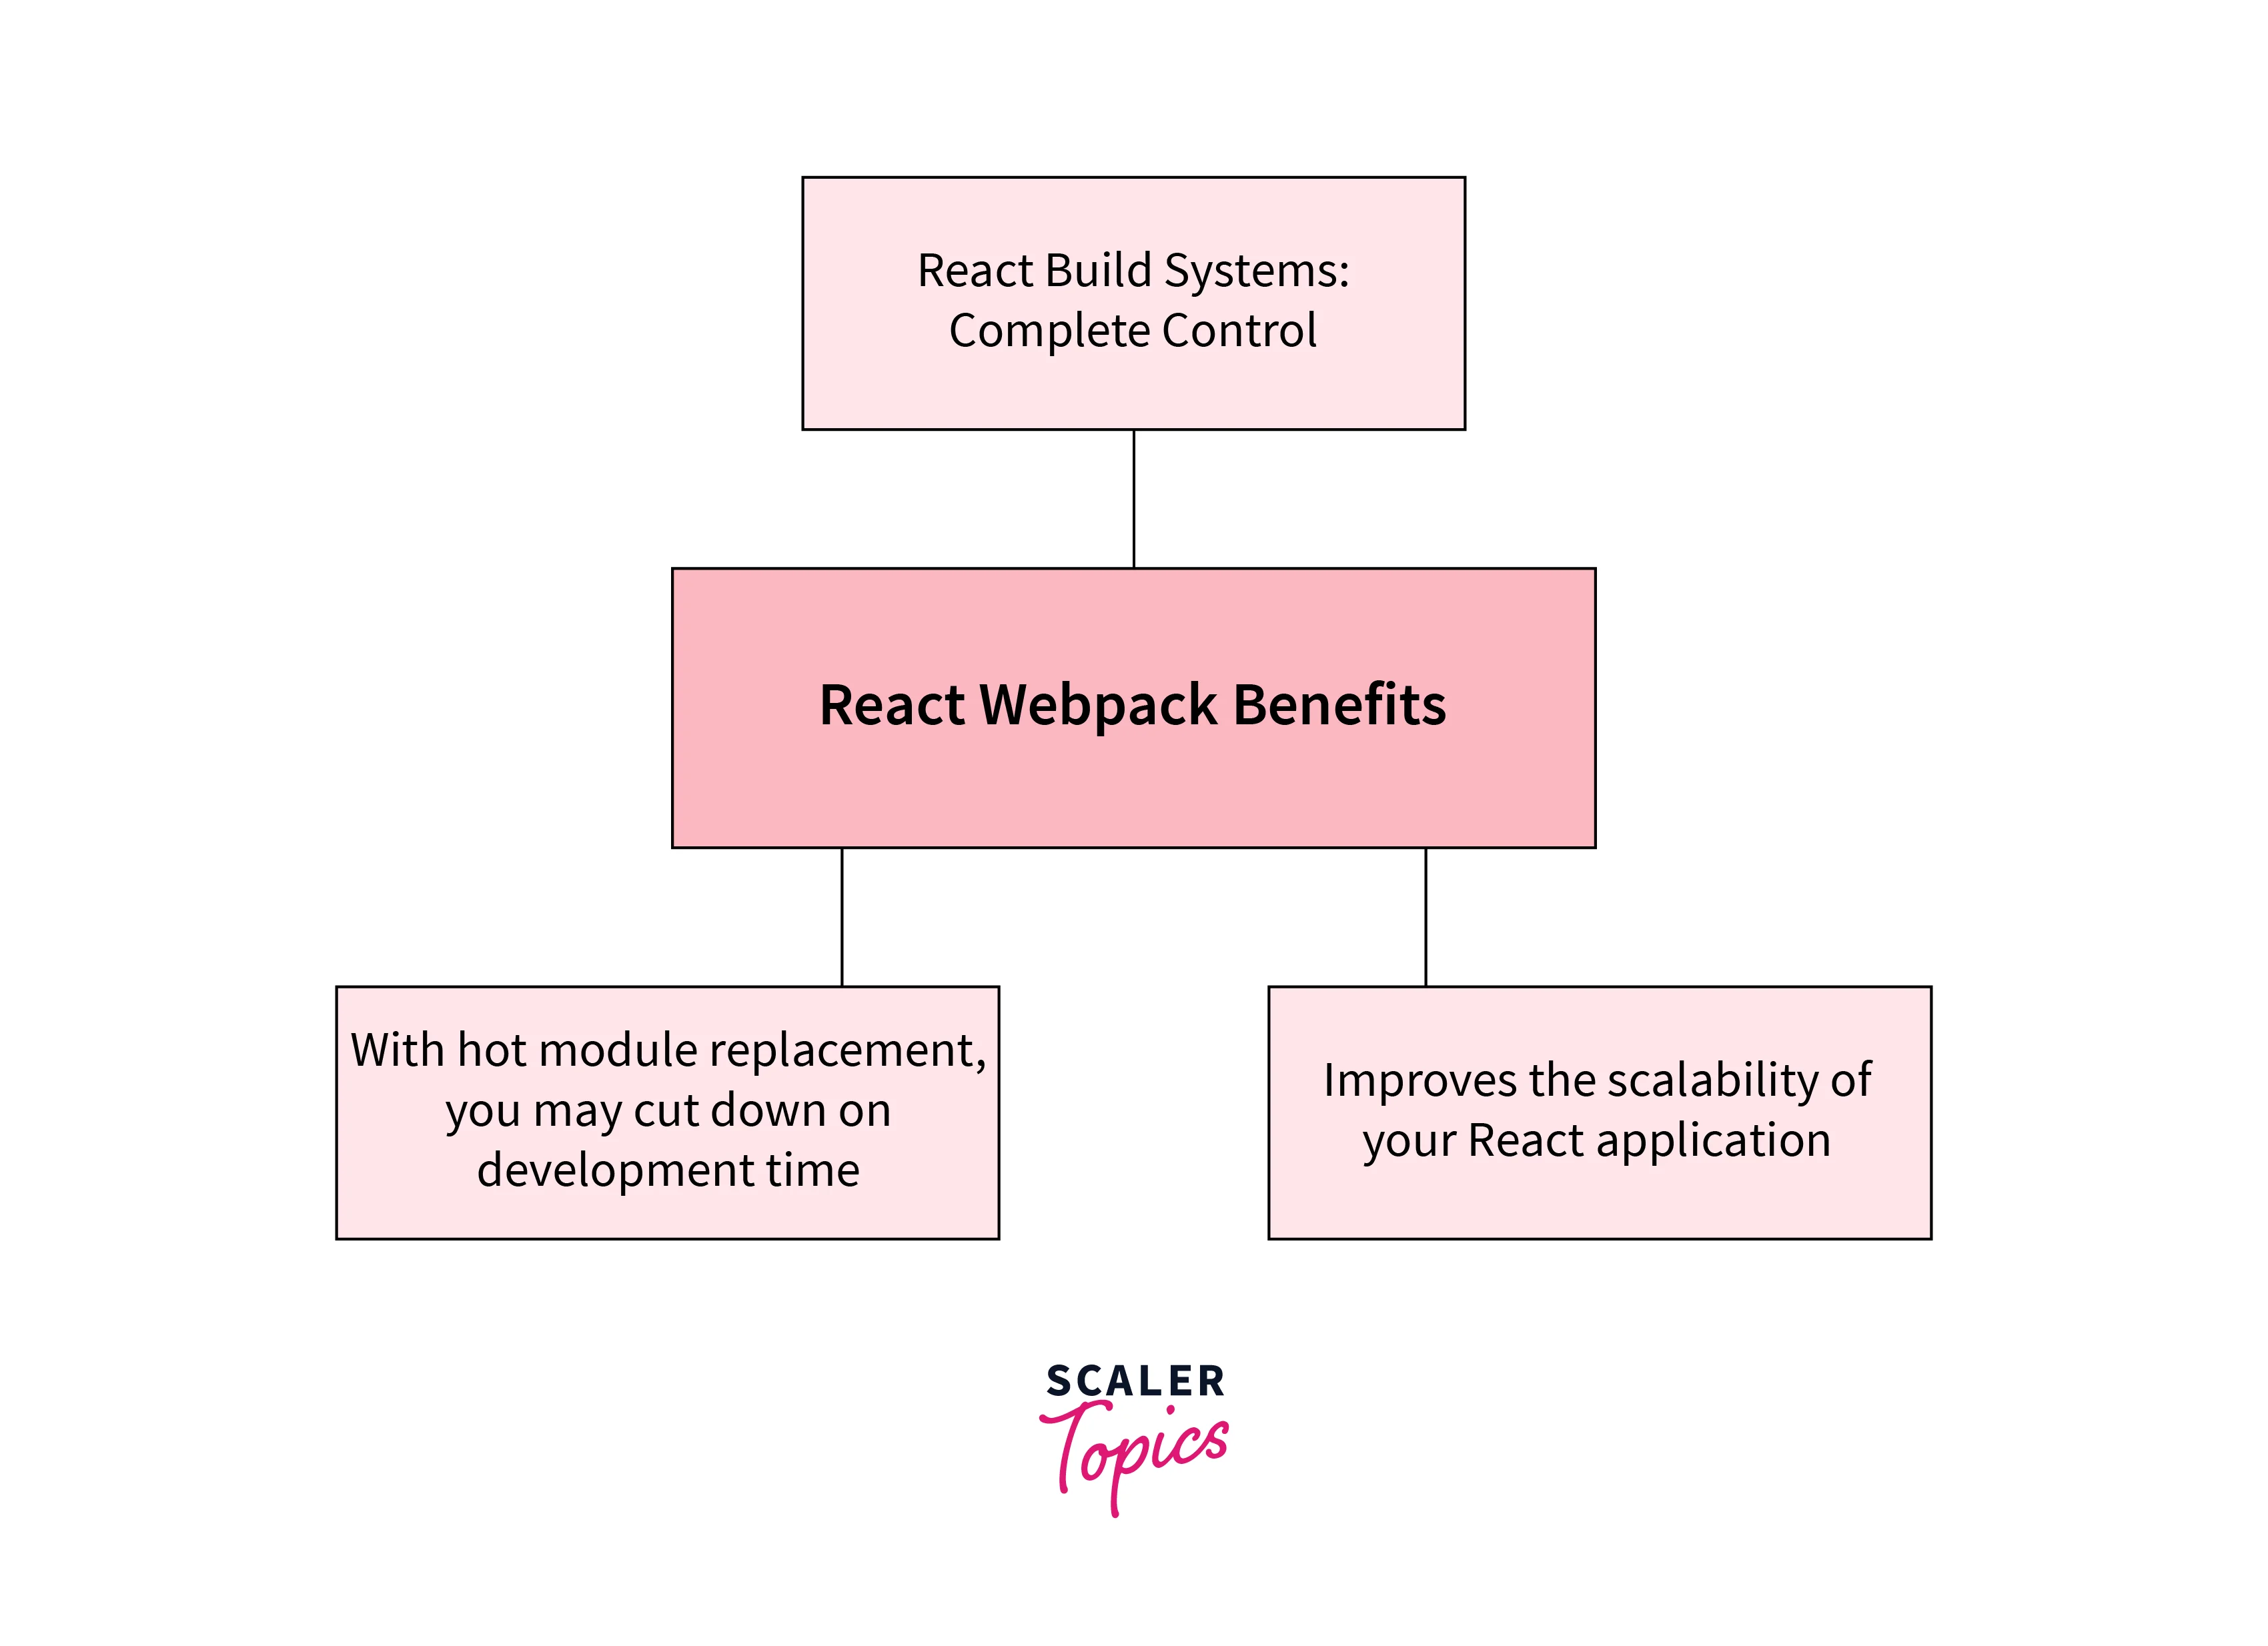 Benefits and Limitations of Using Webpack in react